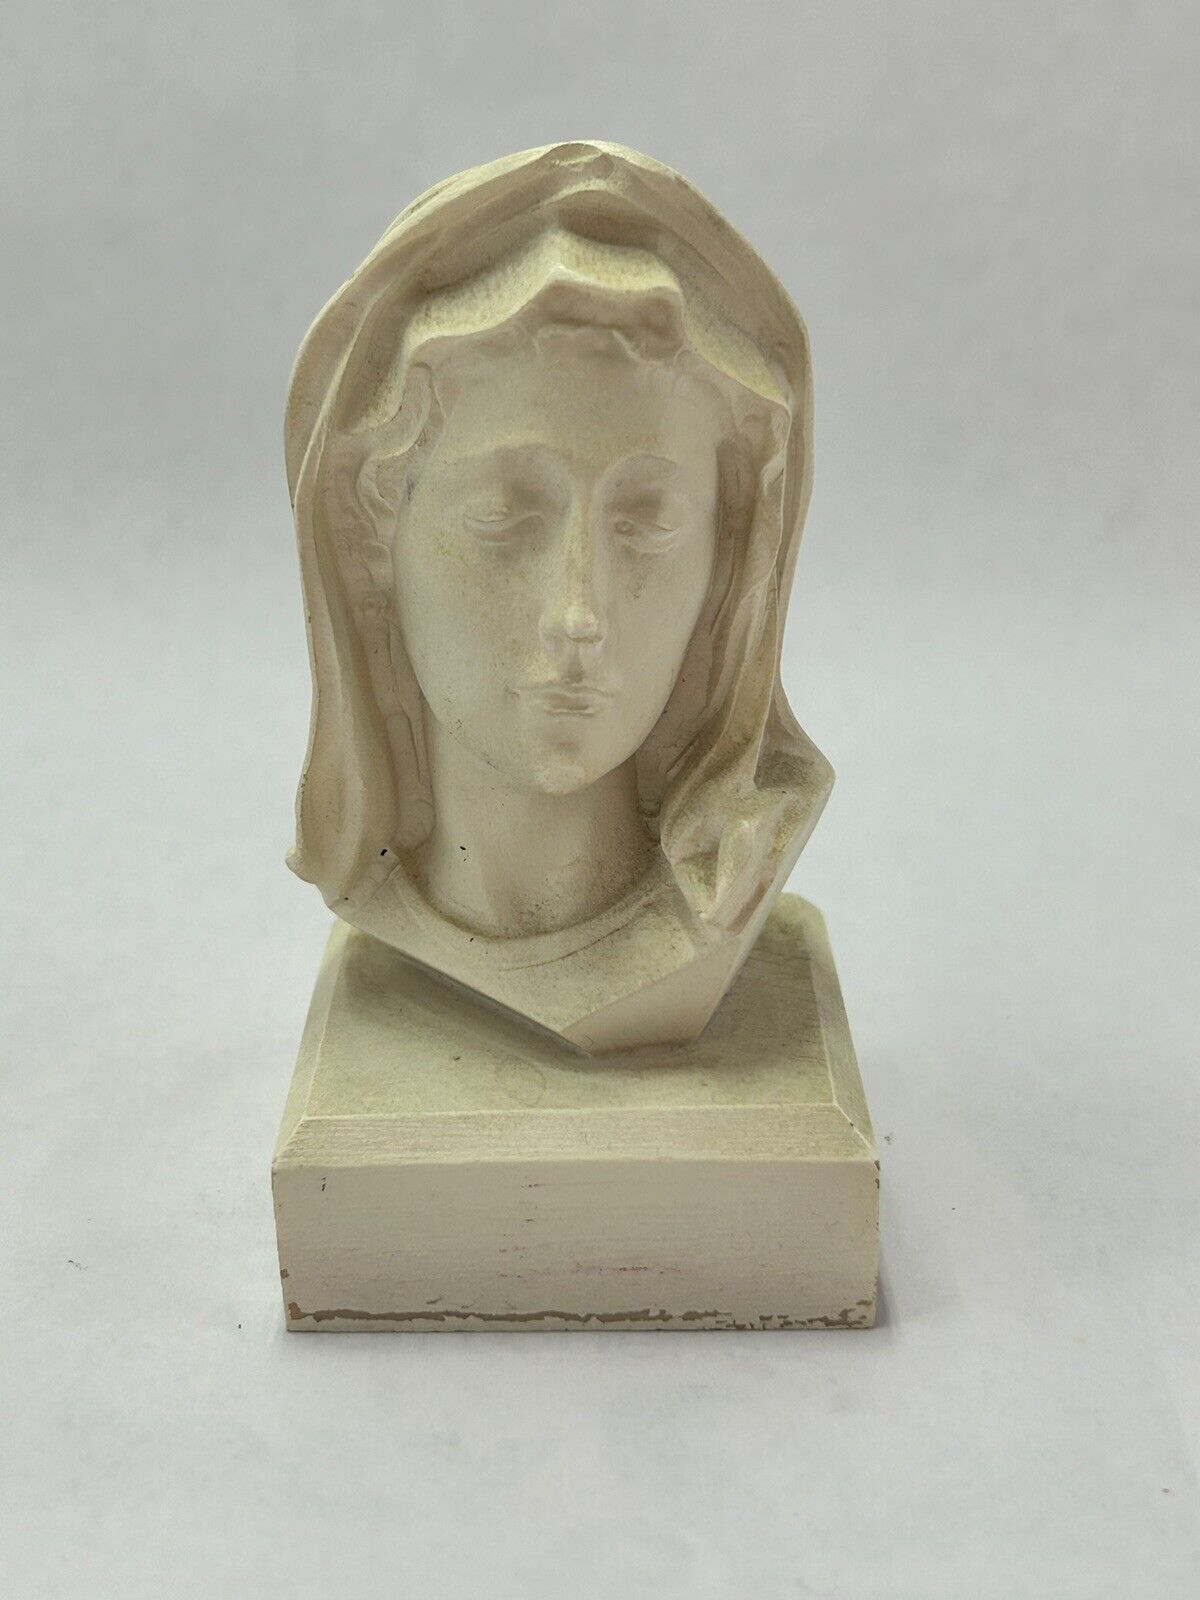 Vintage rare Madonna Virgin Mother Mary Bust by Dolfi made in Italy  4’